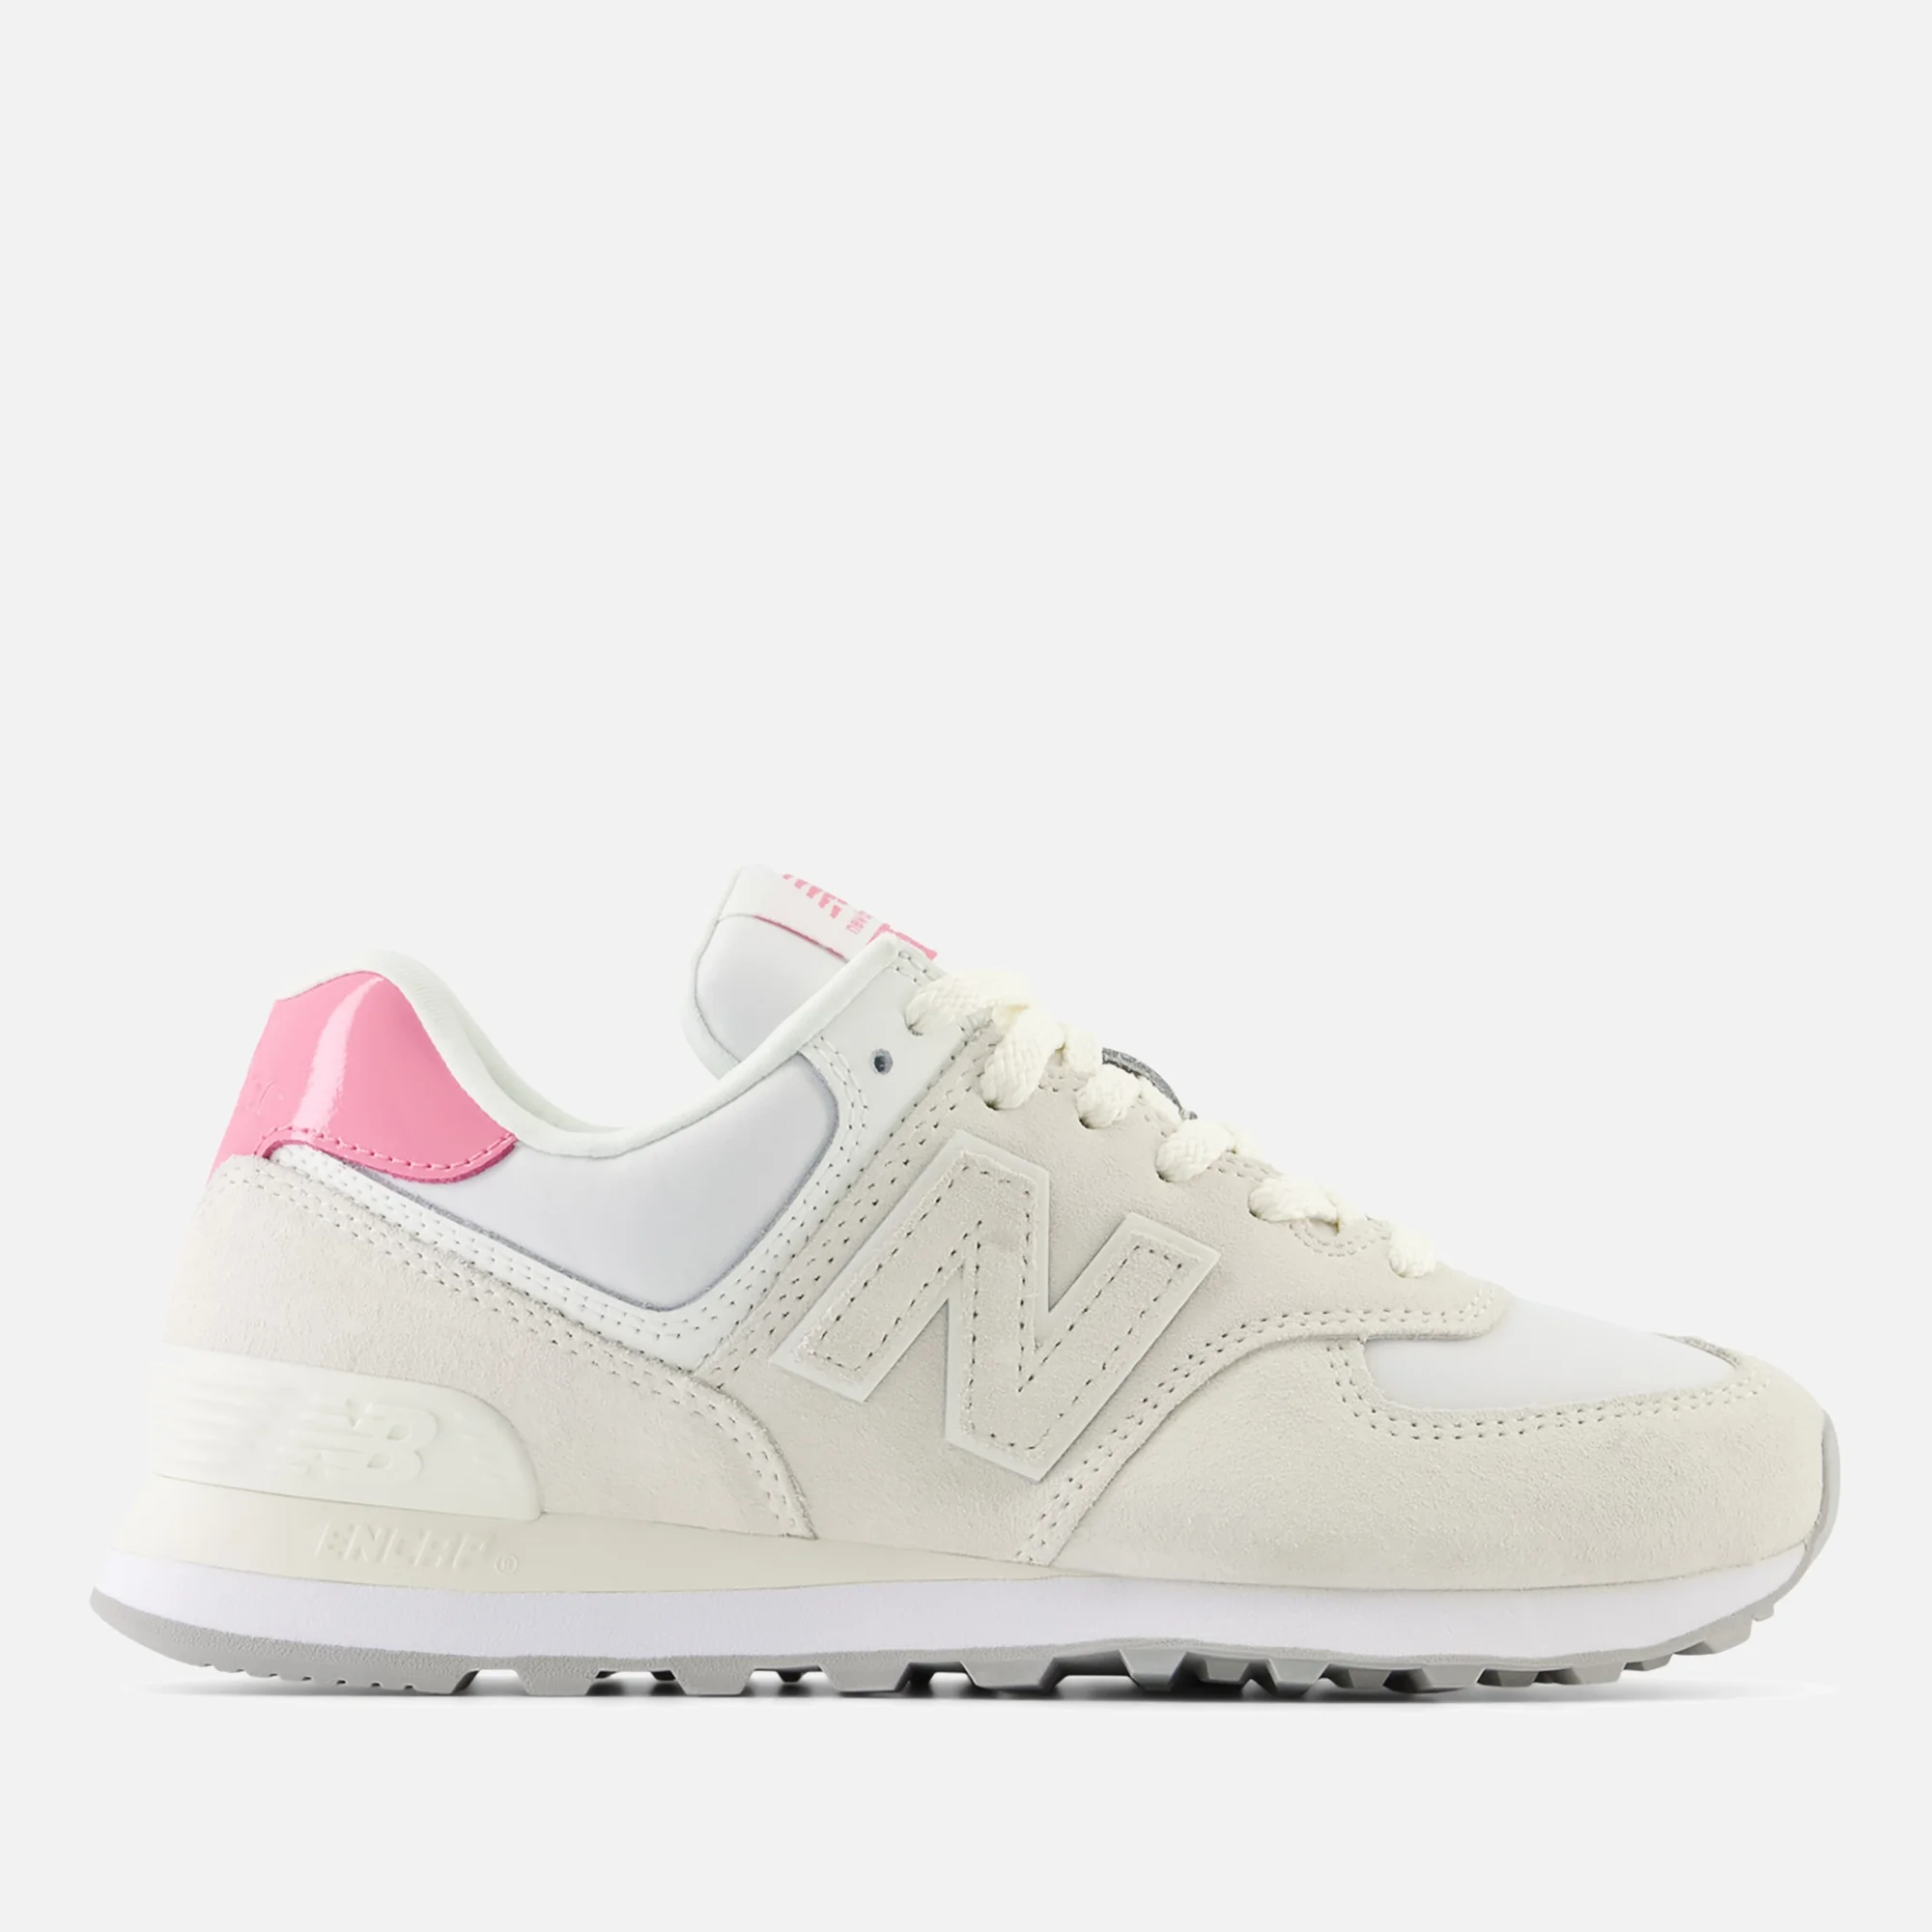 New Balance Women's 574 Suede and Mesh Trainers Image 1